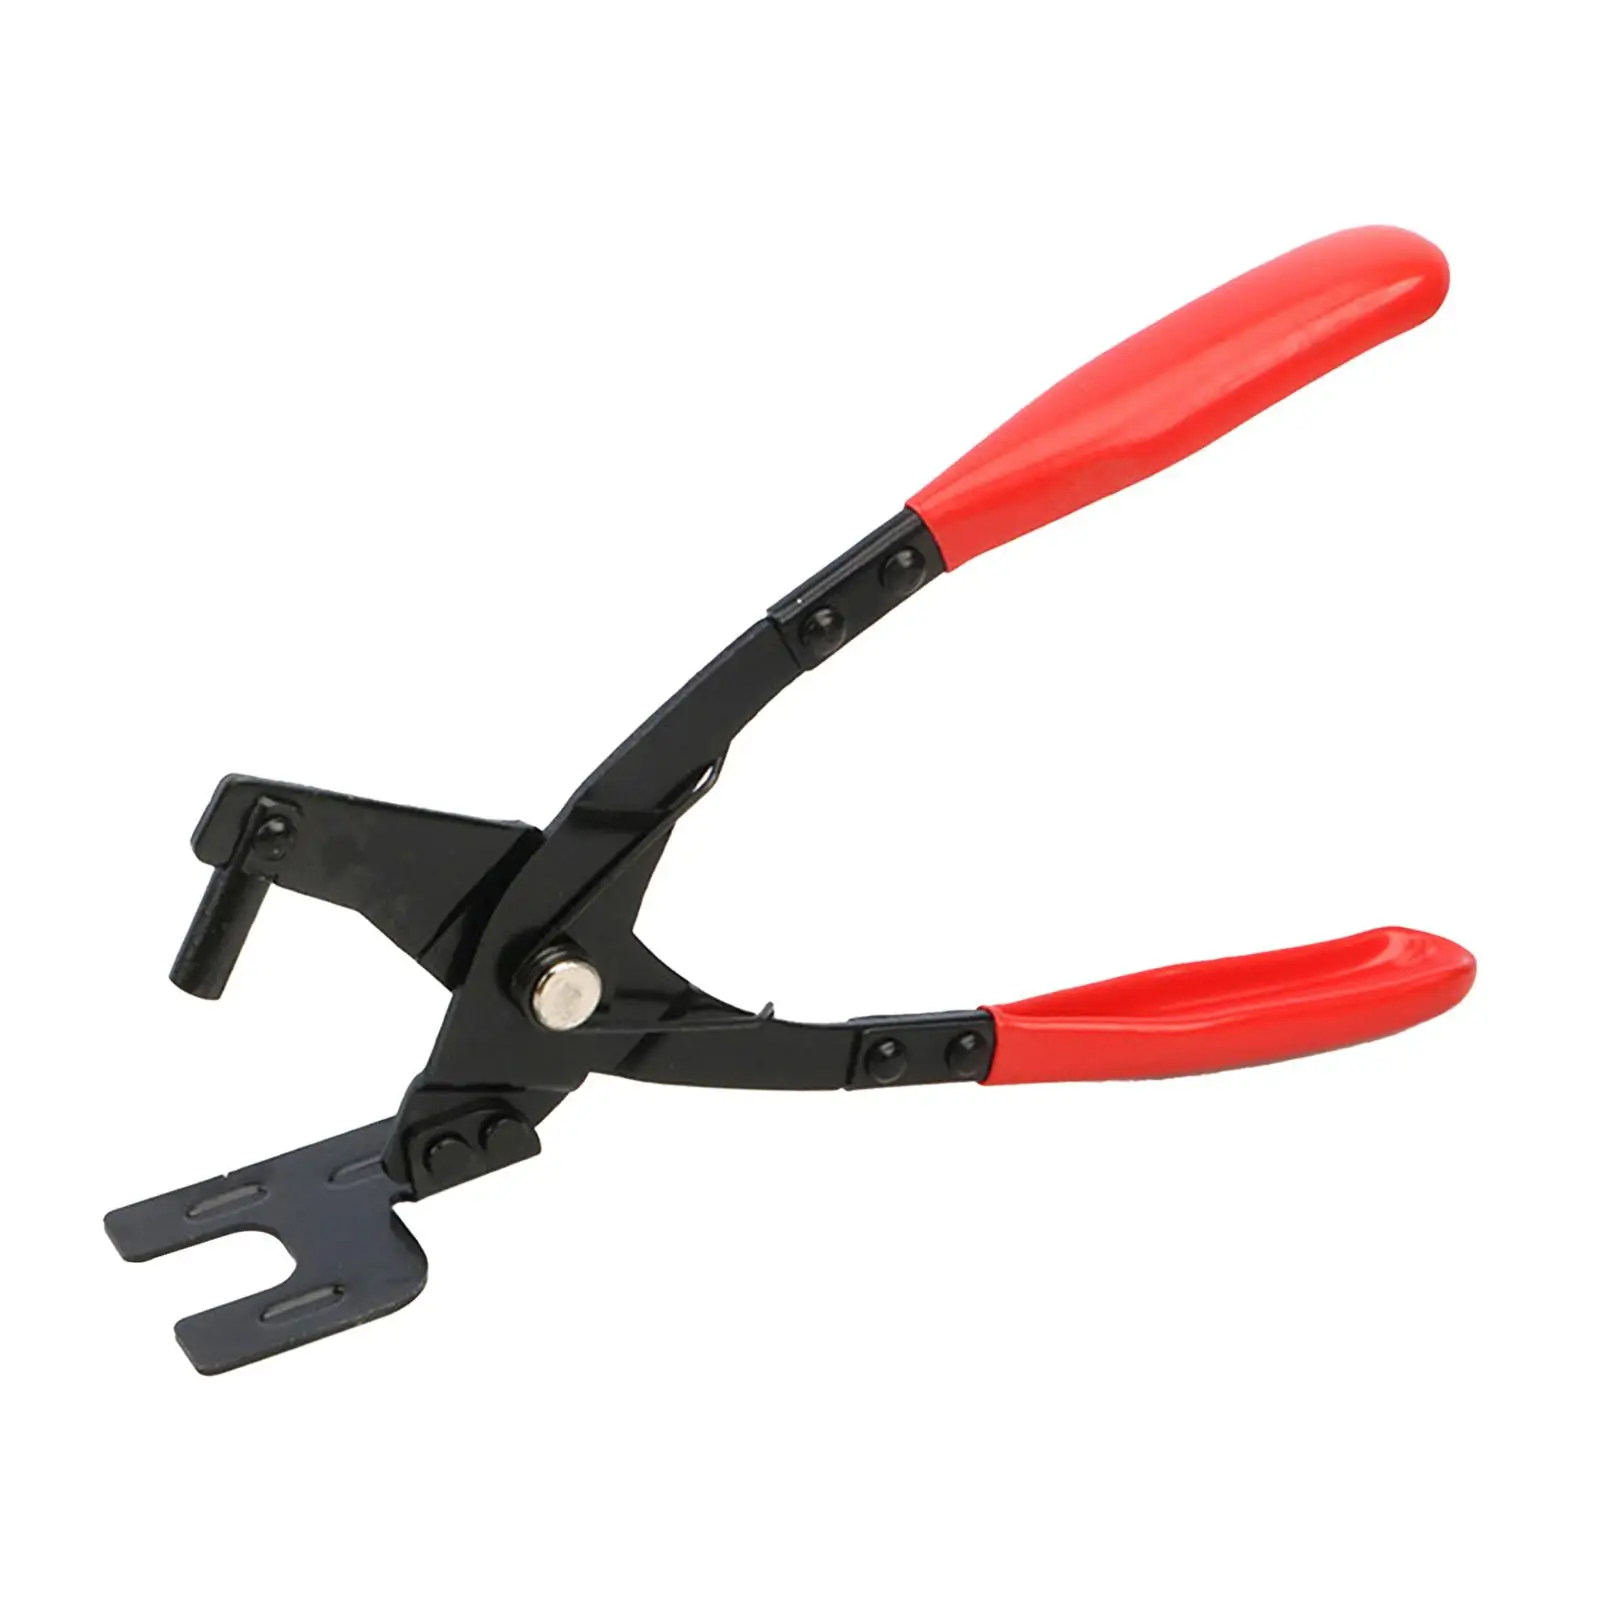 Exhaust Hanger Removal Pliers Non Slip Heavy Duty 25 Degree Offset Handles Exhaust Hanger Removal Tool for Tailpipes, Mufflers